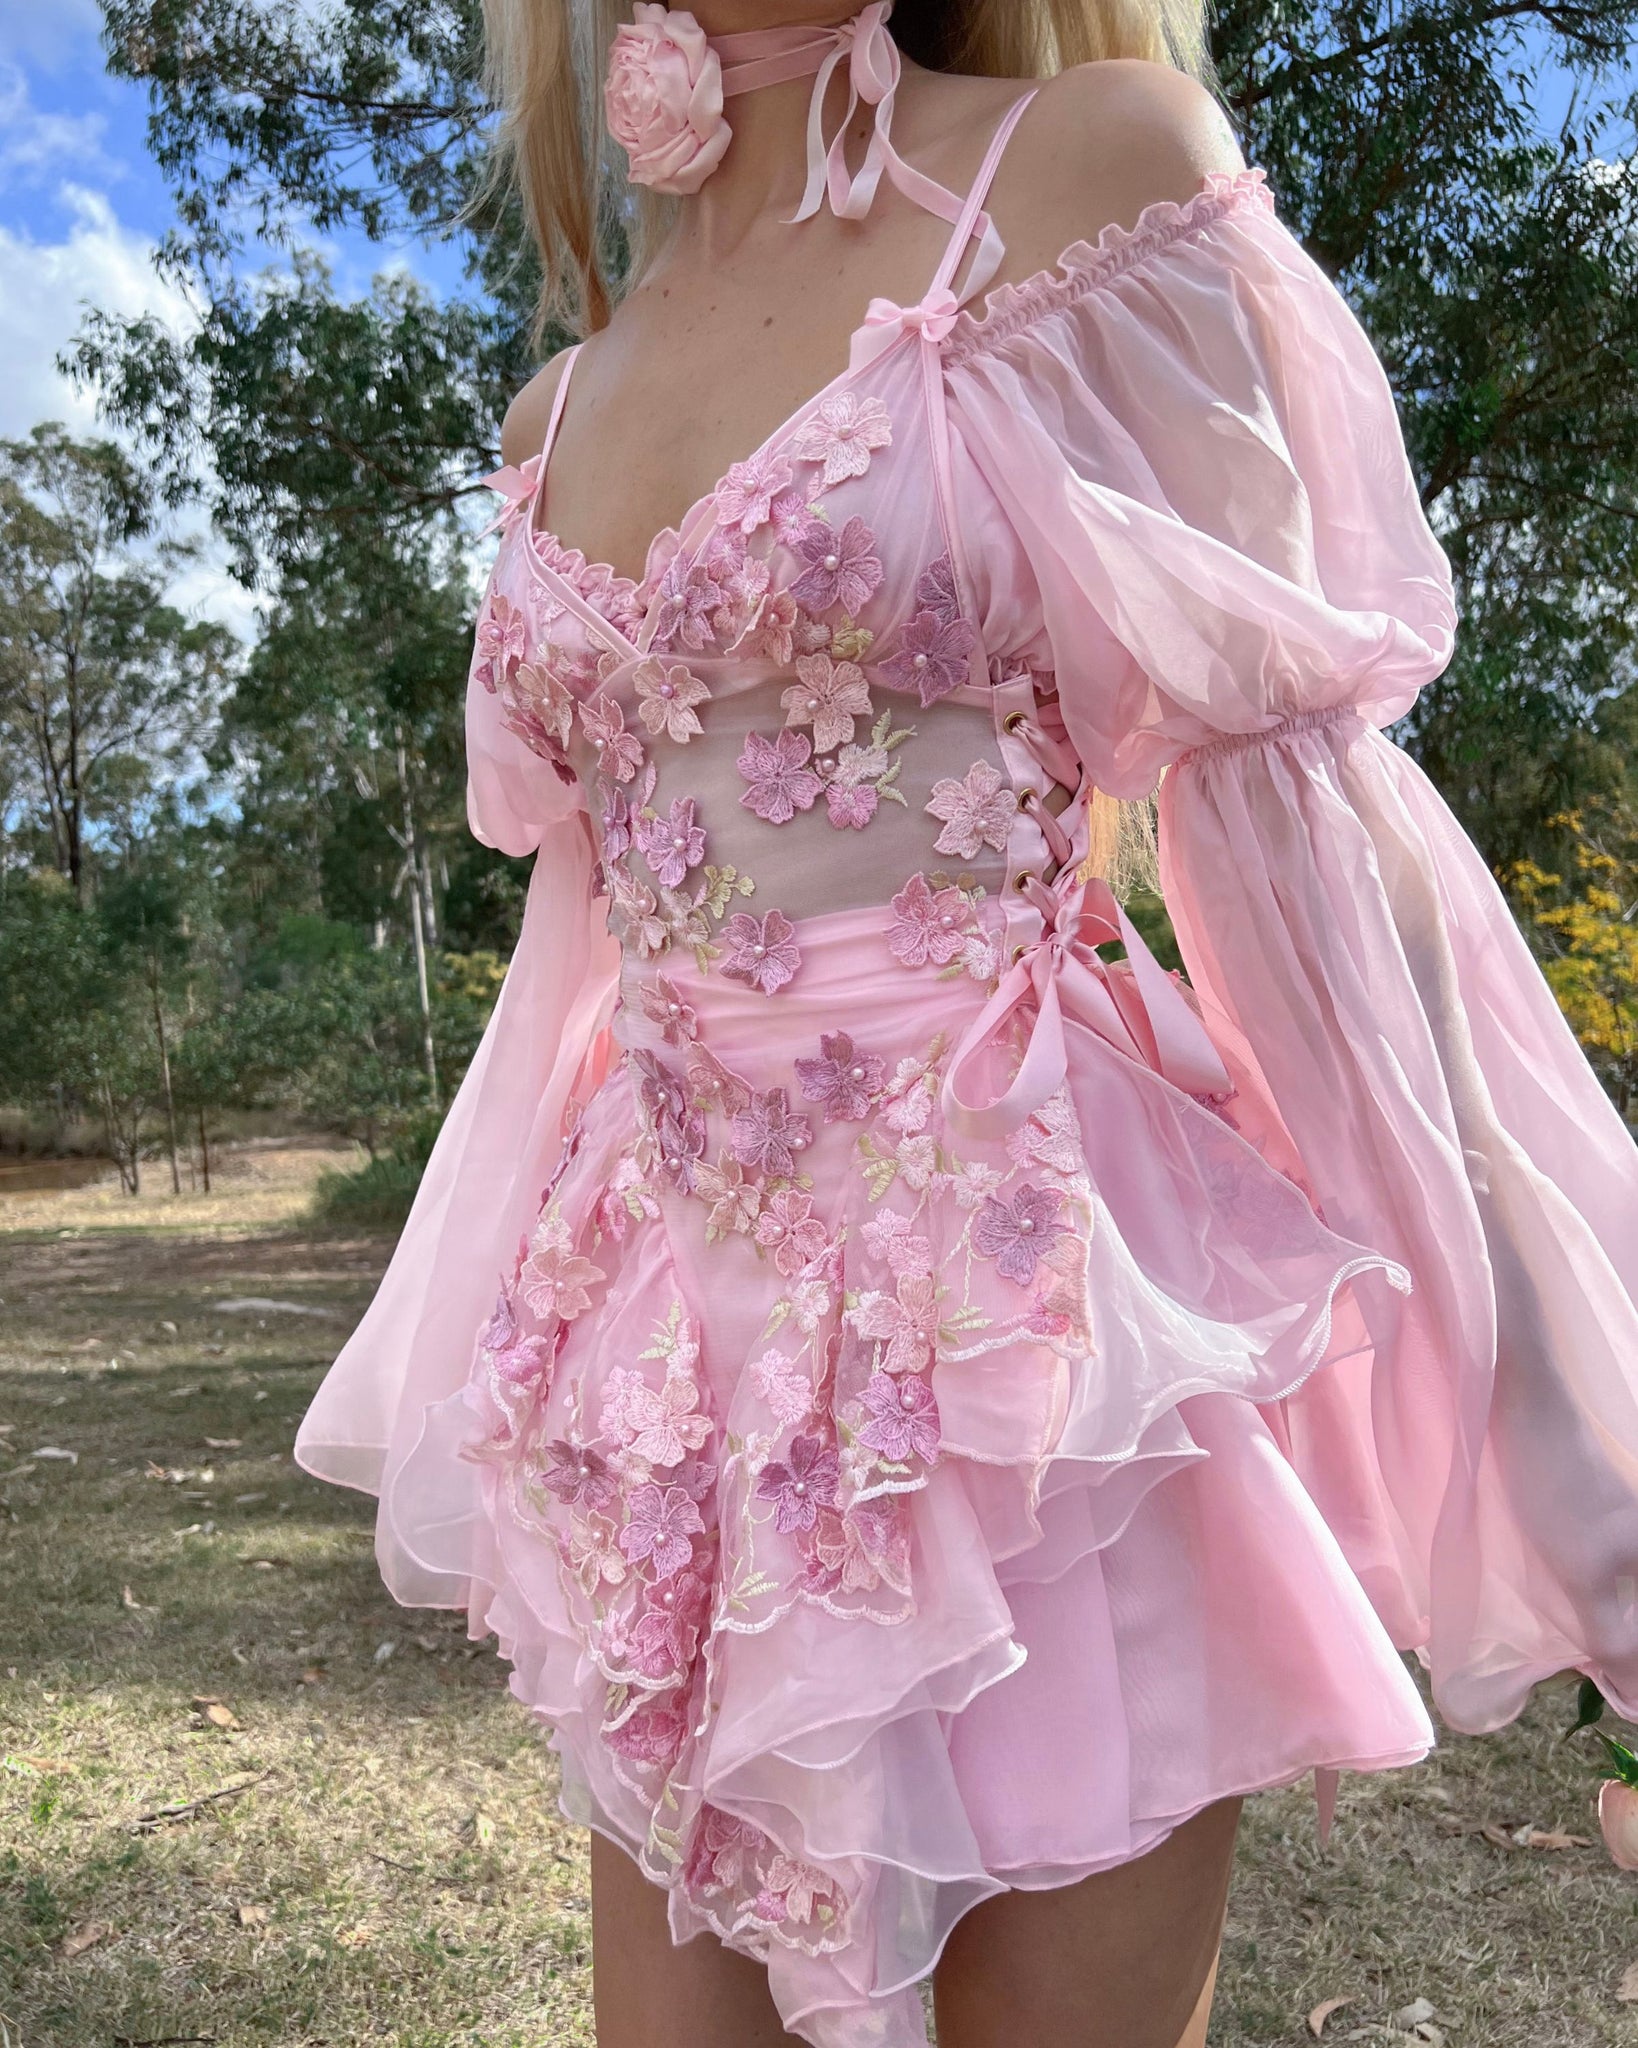 Pink Quilted Fairy Gown by Michelle-Bound on DeviantArt